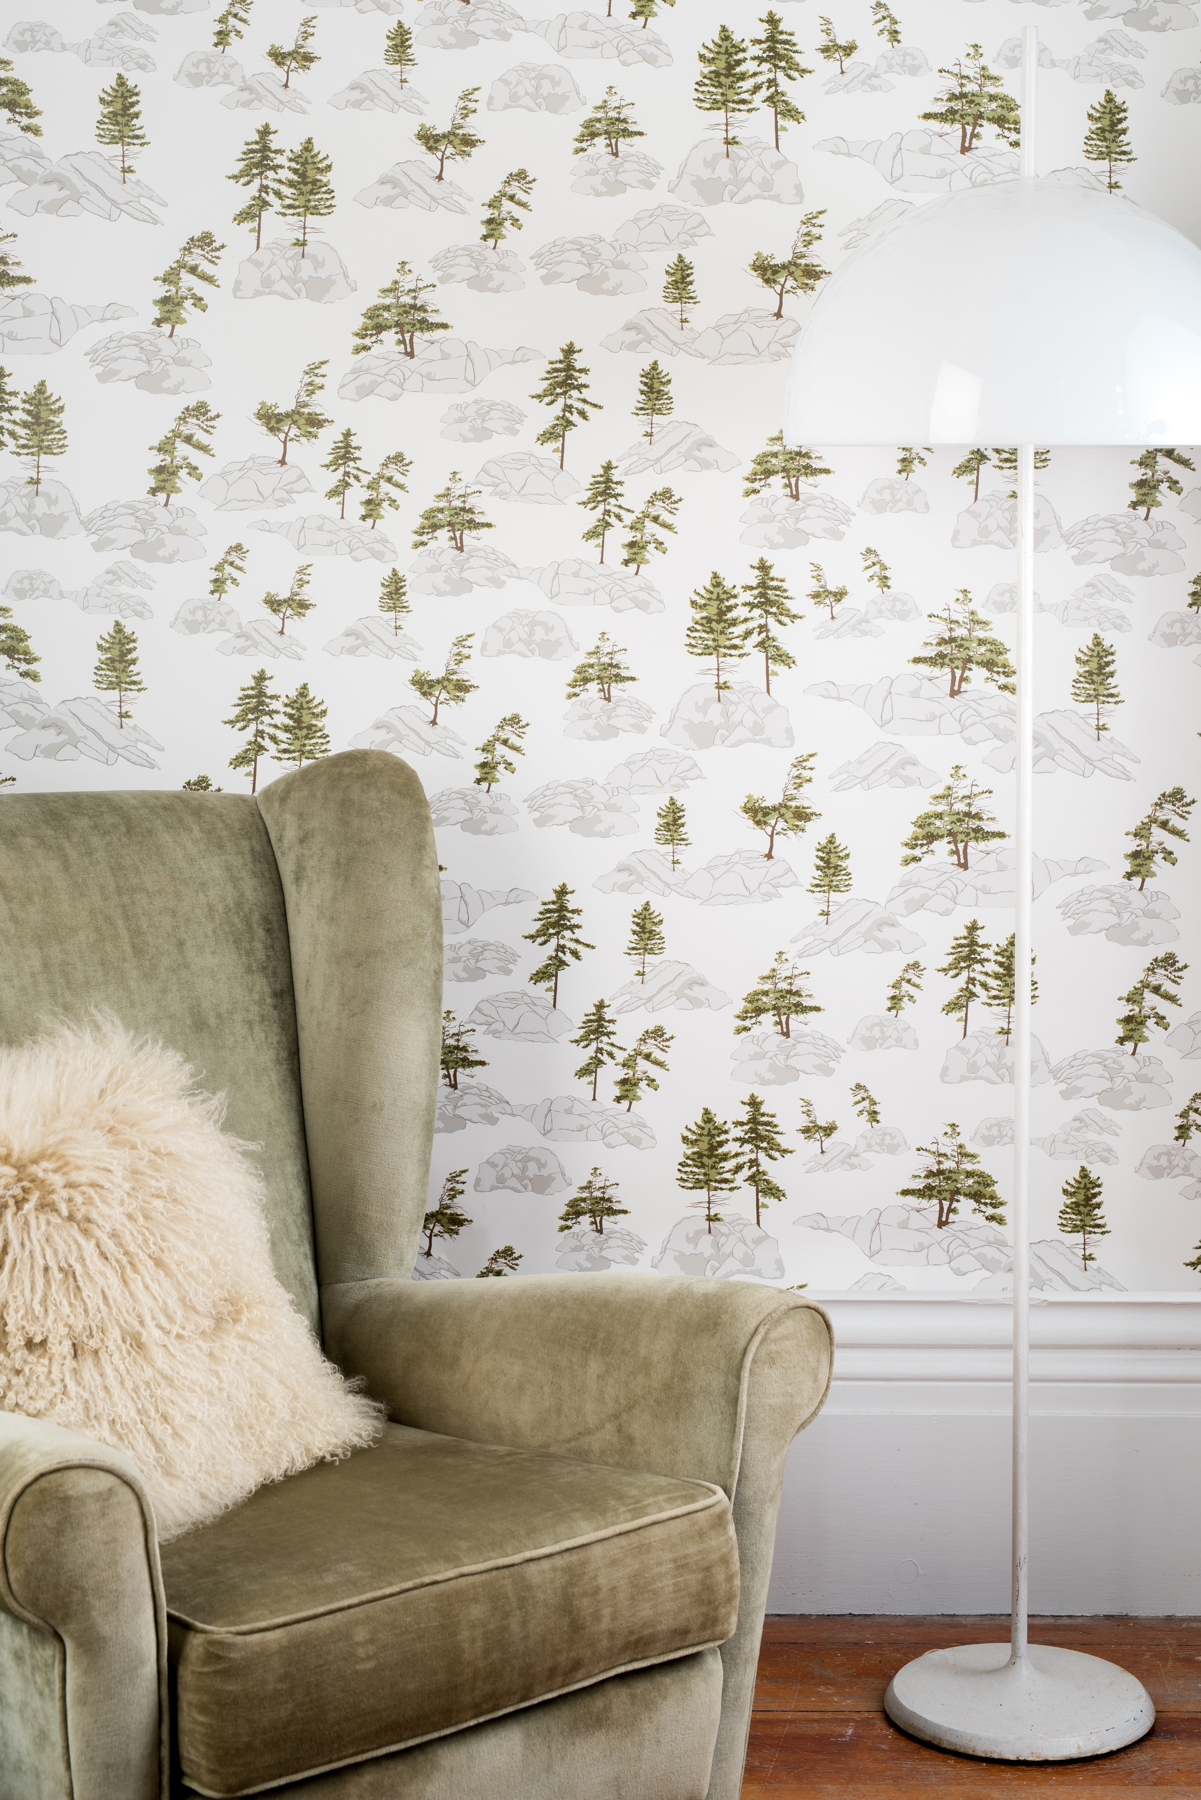 Kate Golding Canadian Shield wallpaper // Modern wallcoverings and interior decor.